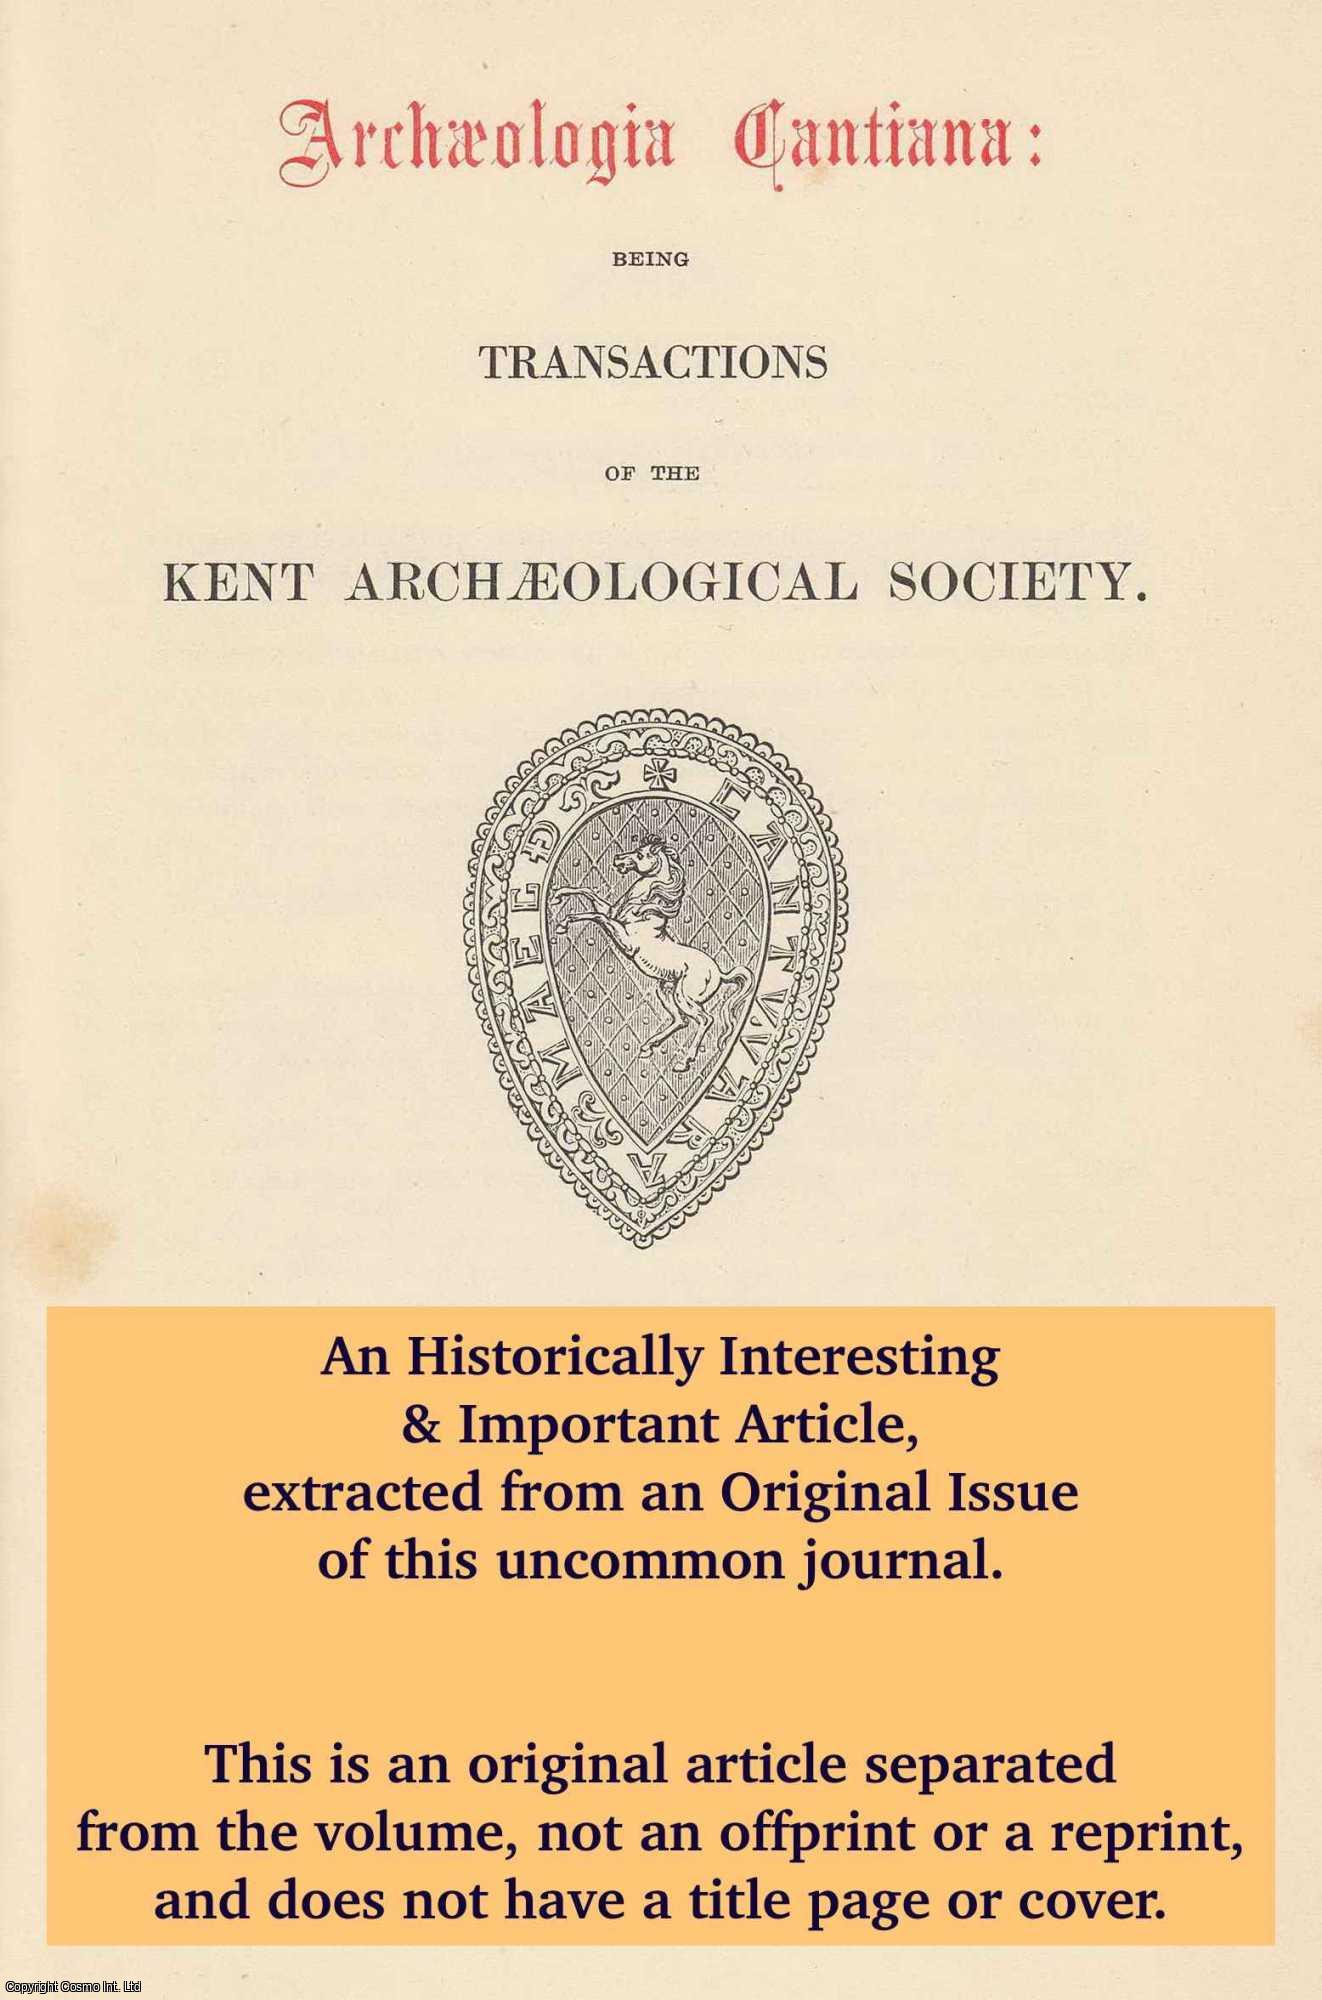 Terence Paul Smith - The Church of St. Peter, Canterbury. An original article from The Archaeologia Cantiana, 1972.